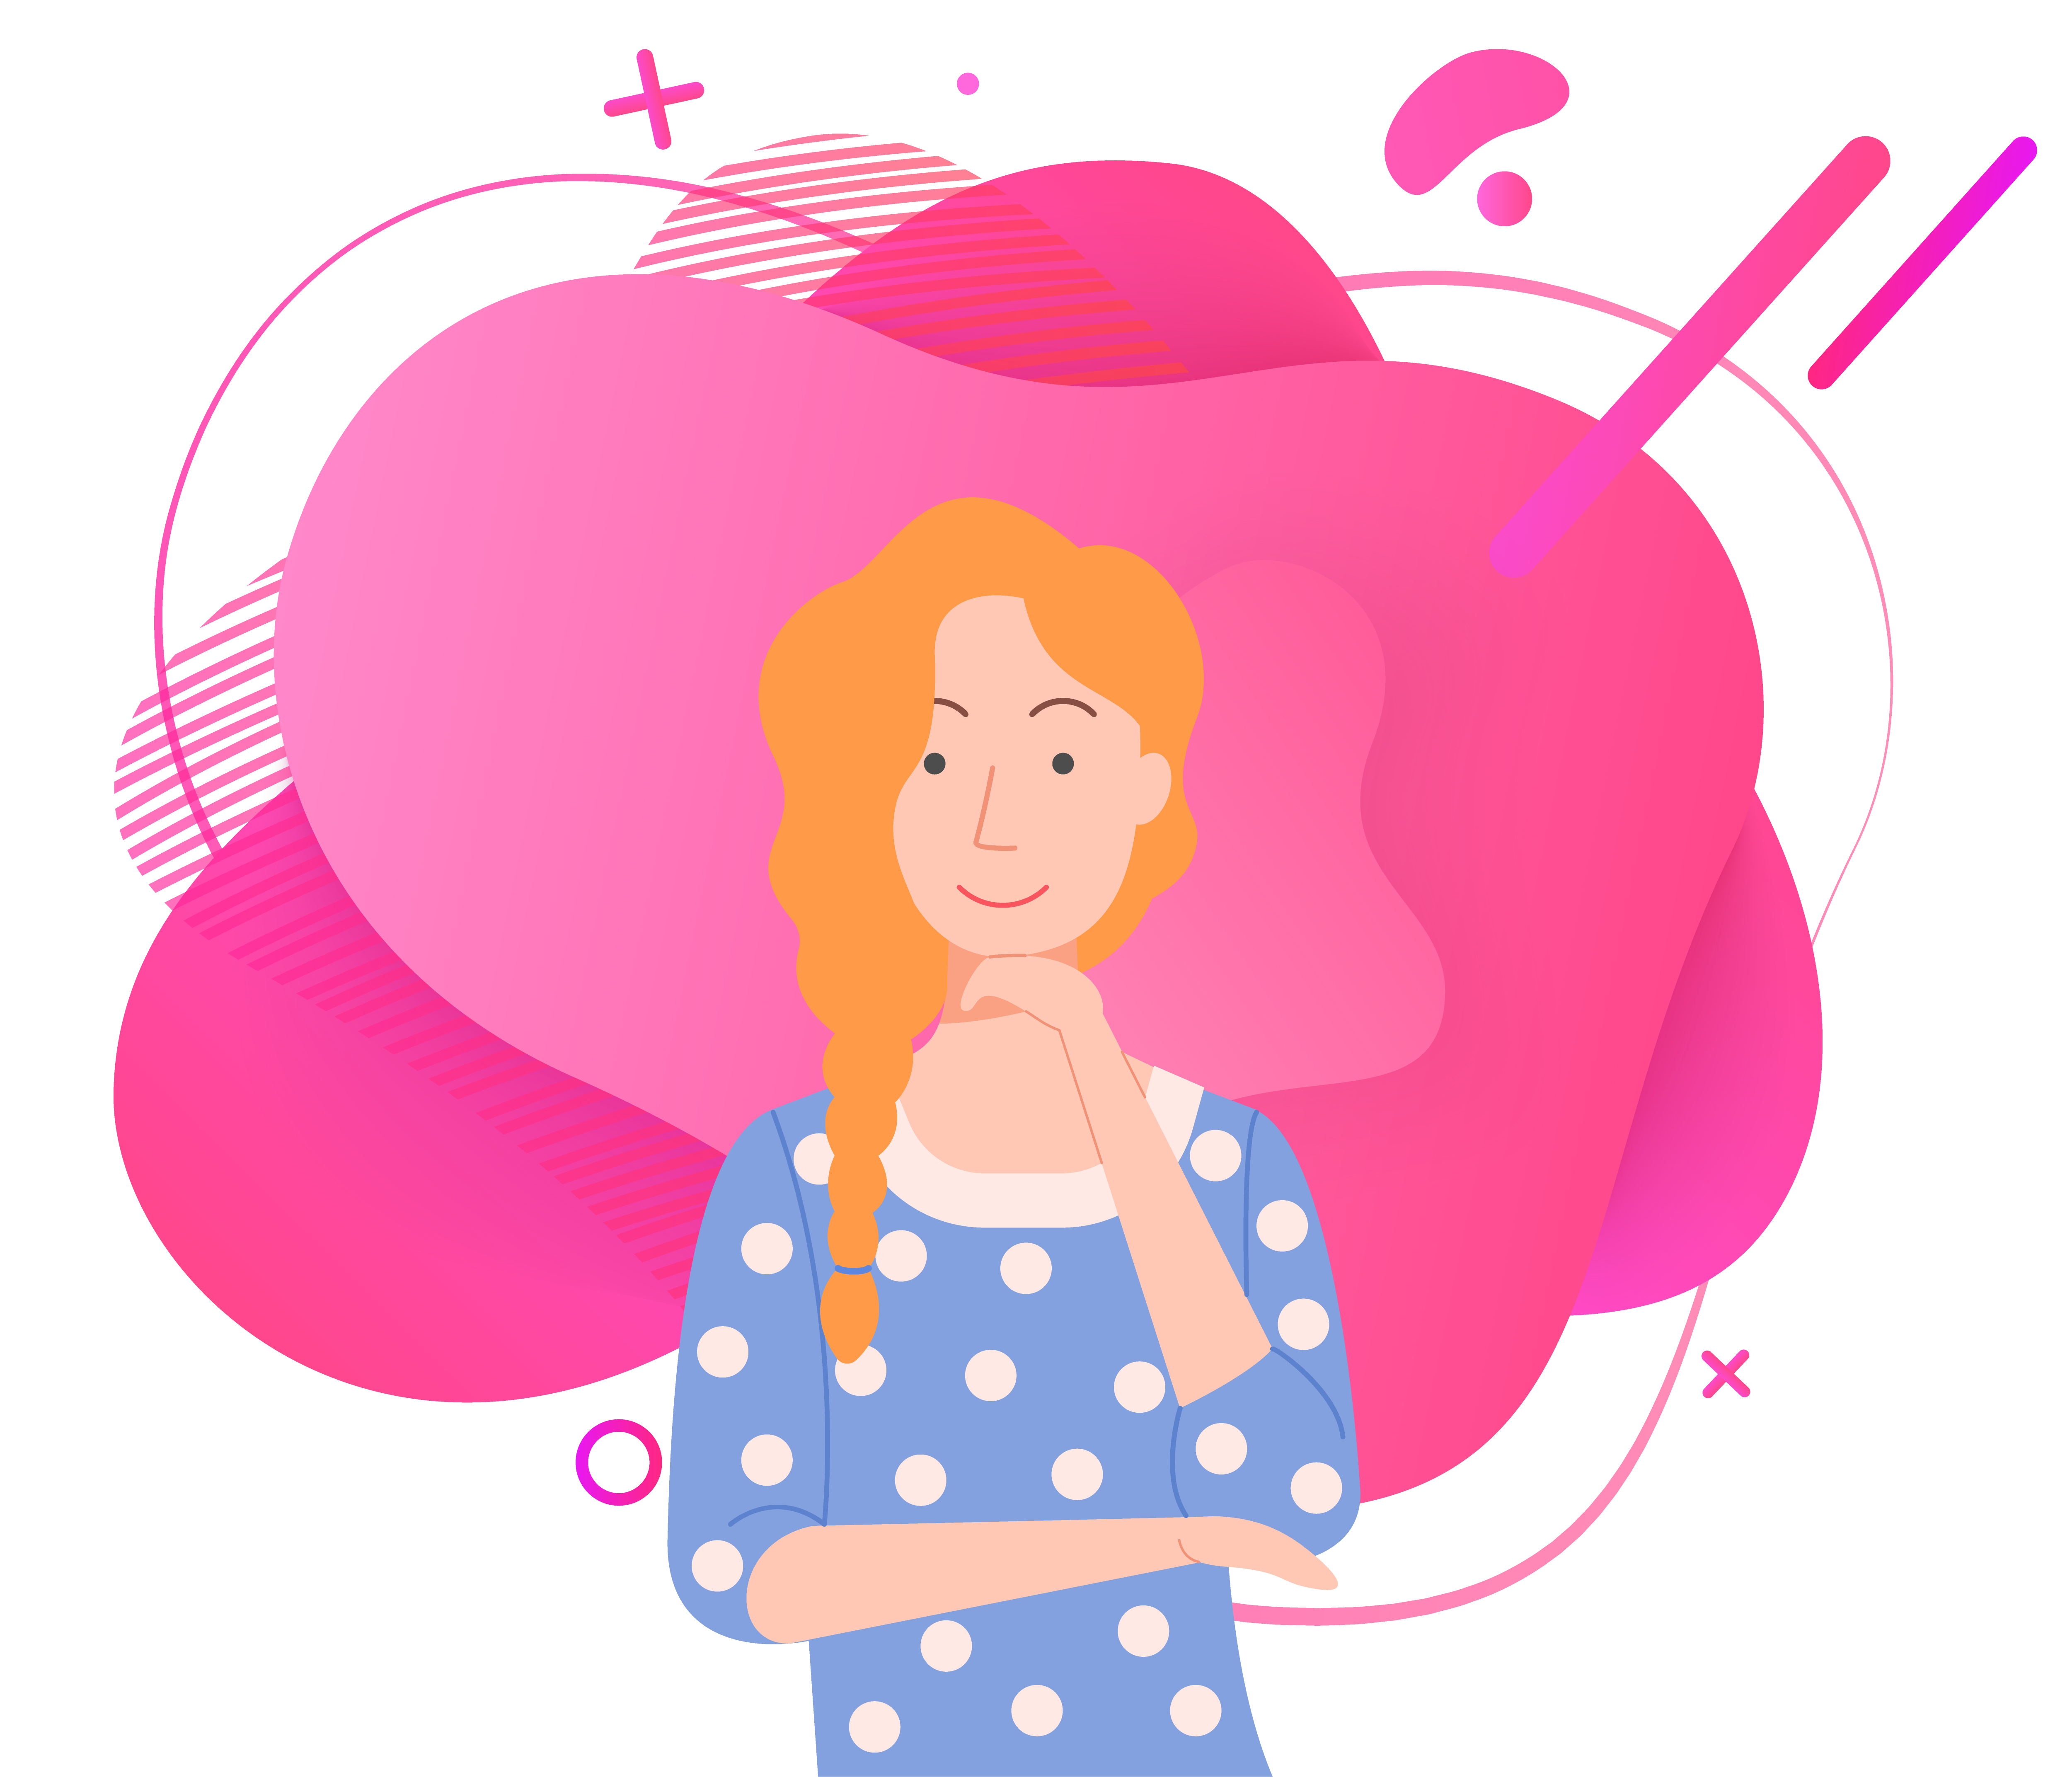 Charming young woman with ginger braid on one side touching her chin while posing. Red haired girl and abstract pink circles background vector illustration. Young Woman Posing Touching Chin Vector Image